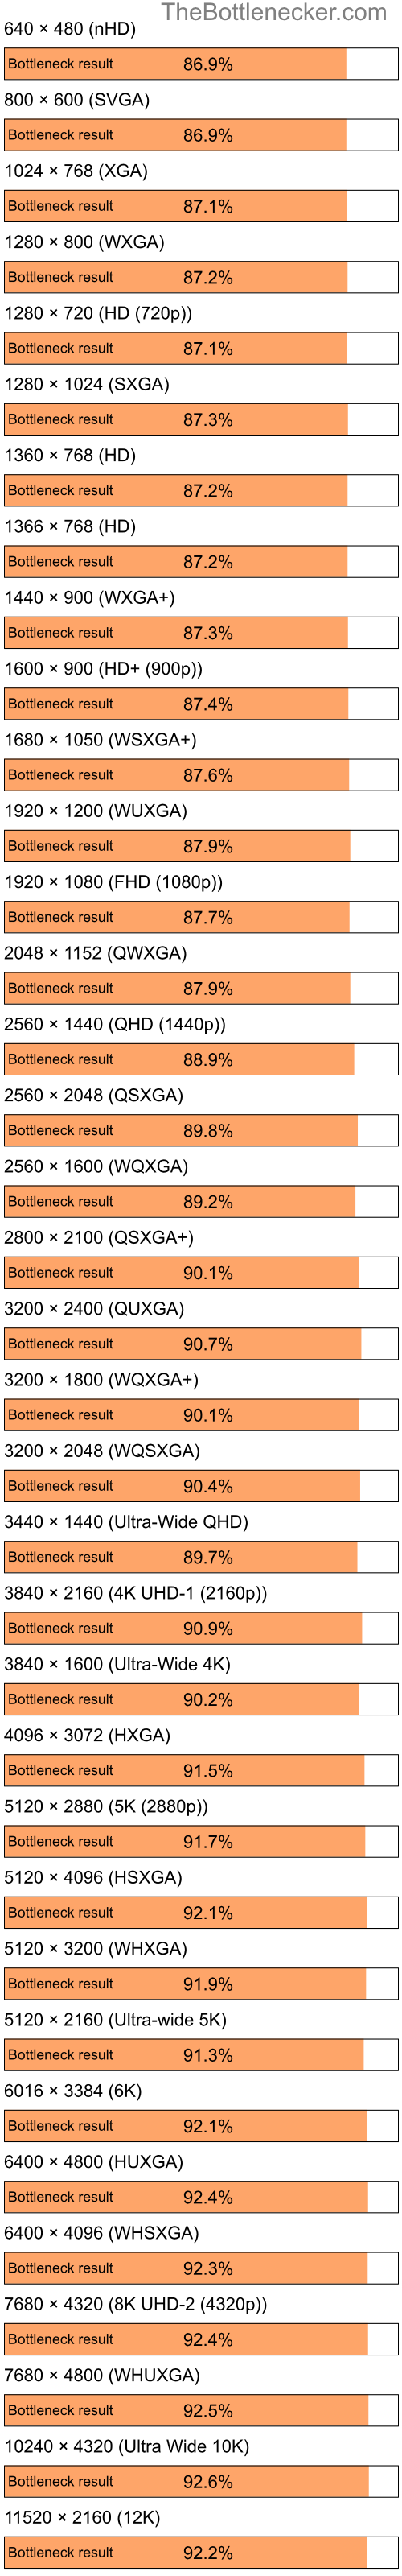 Bottleneck results by resolution for Intel Pentium 4 and NVIDIA GeForce4 MX 440 in Processor Intense Tasks